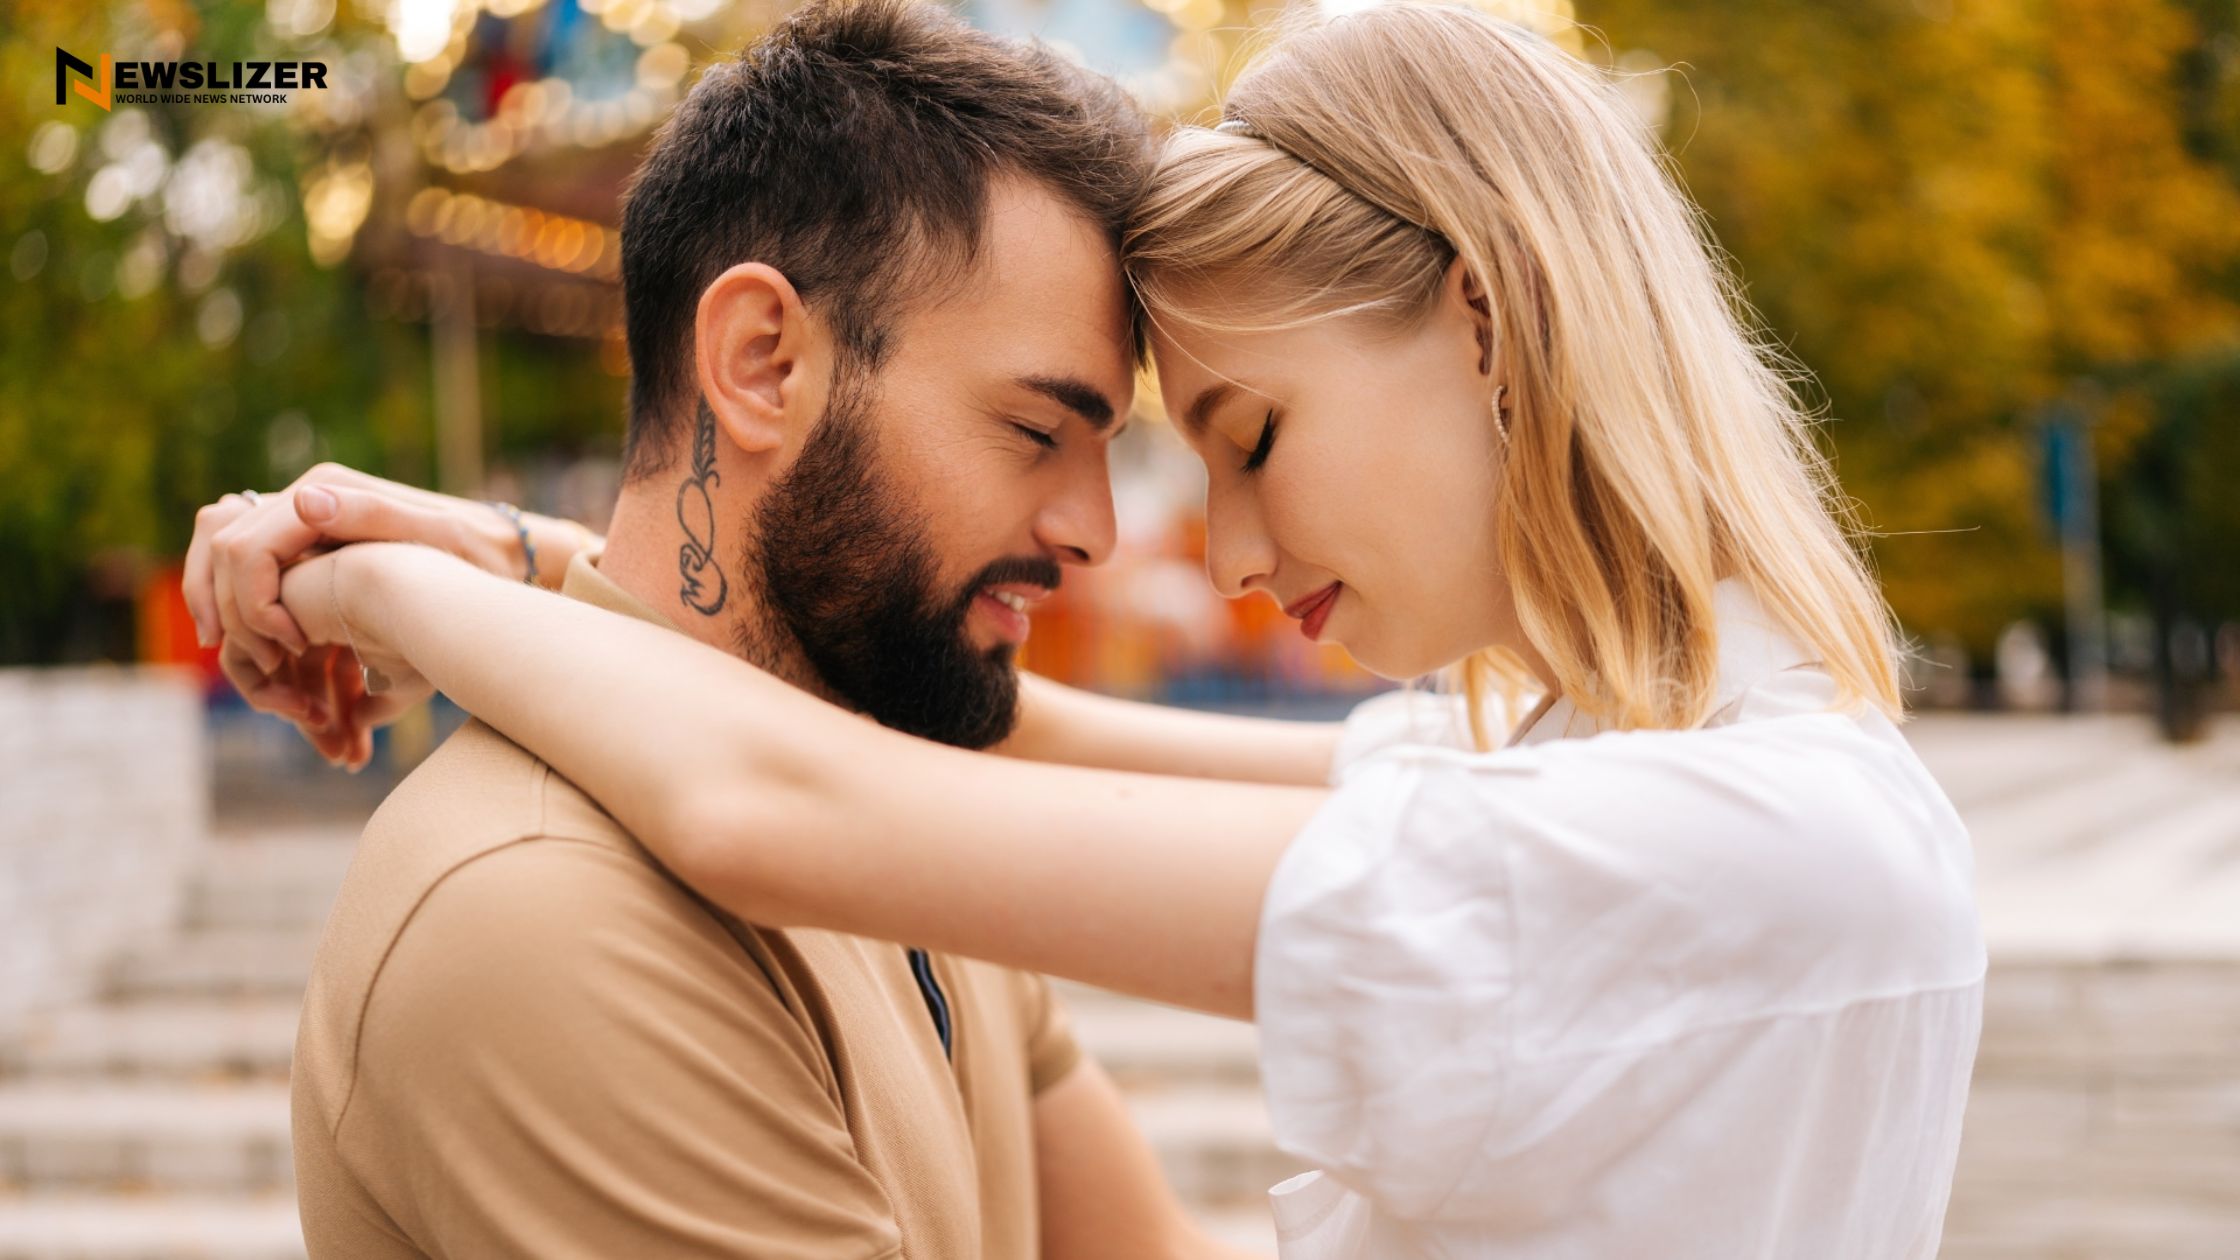 5 Tips to Strengthen Your Relationship and Deepen Your Connection